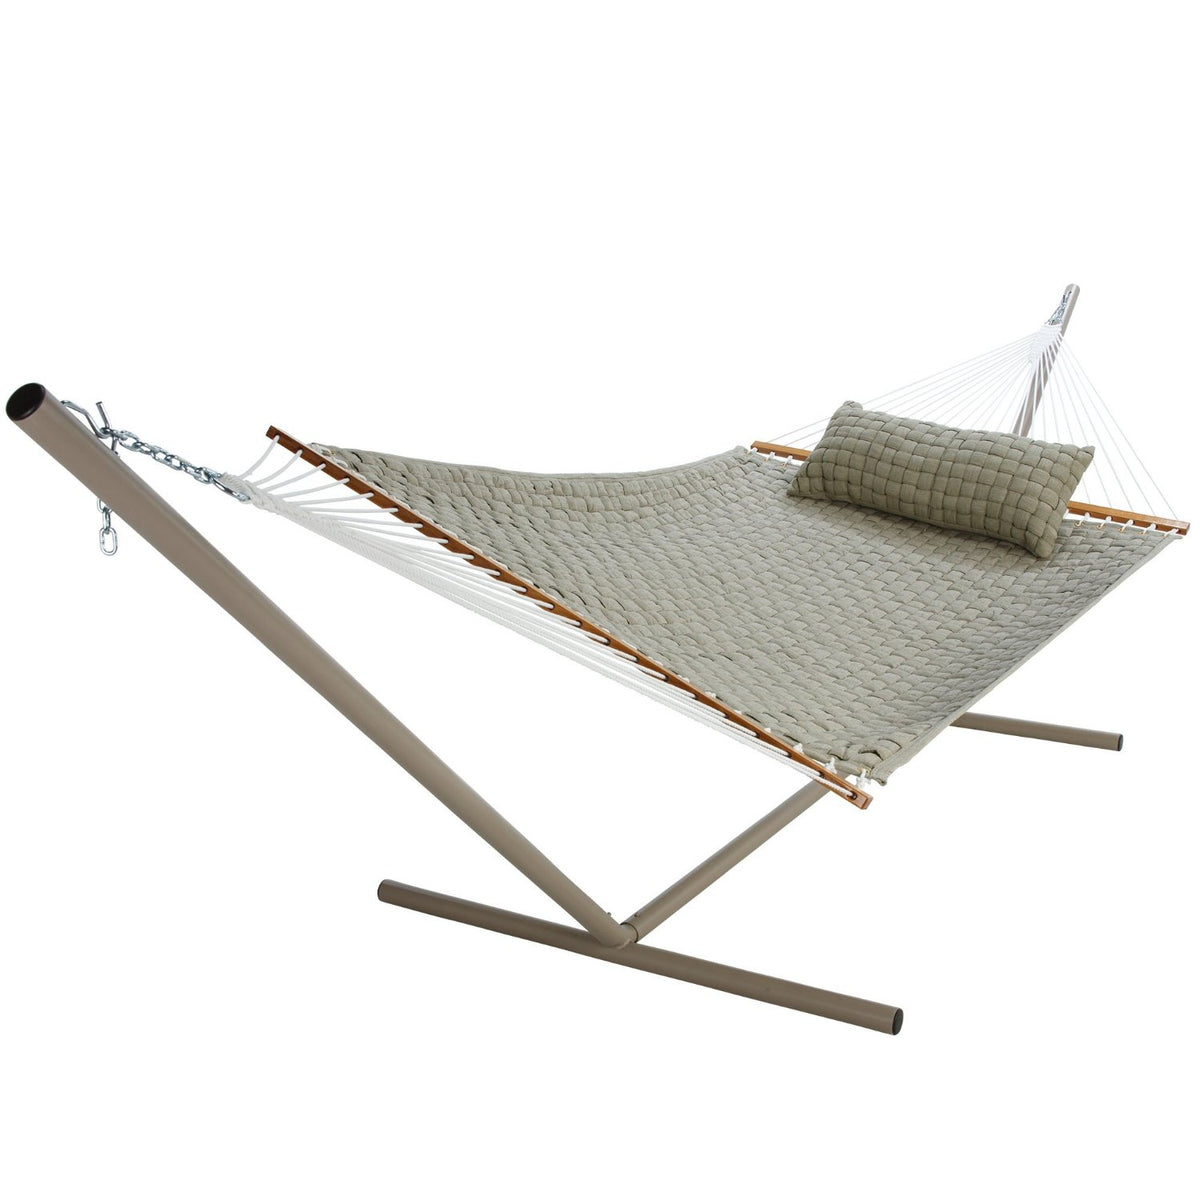 buy outdoor hammocks, stands & accessories at cheap rate in bulk. wholesale & retail outdoor cooler & picnic items store.